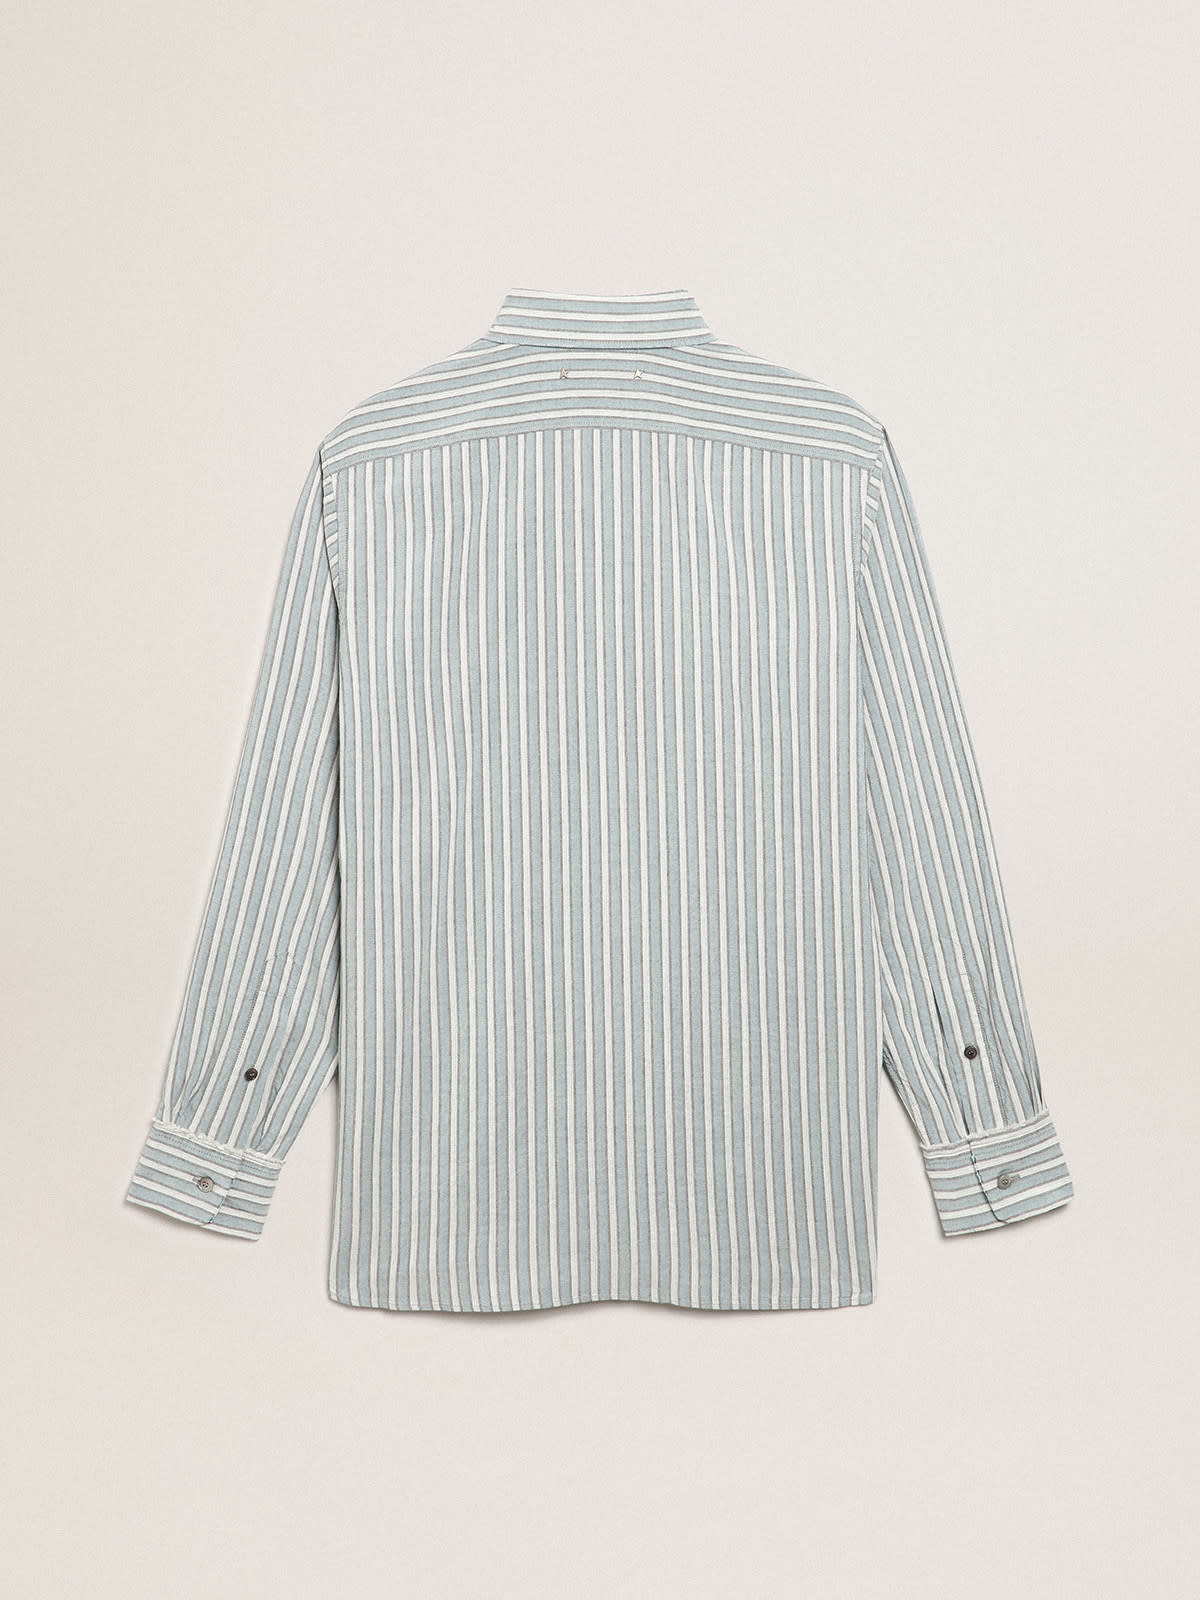 Golden Goose - Men's shirt in viscose with stripes in 